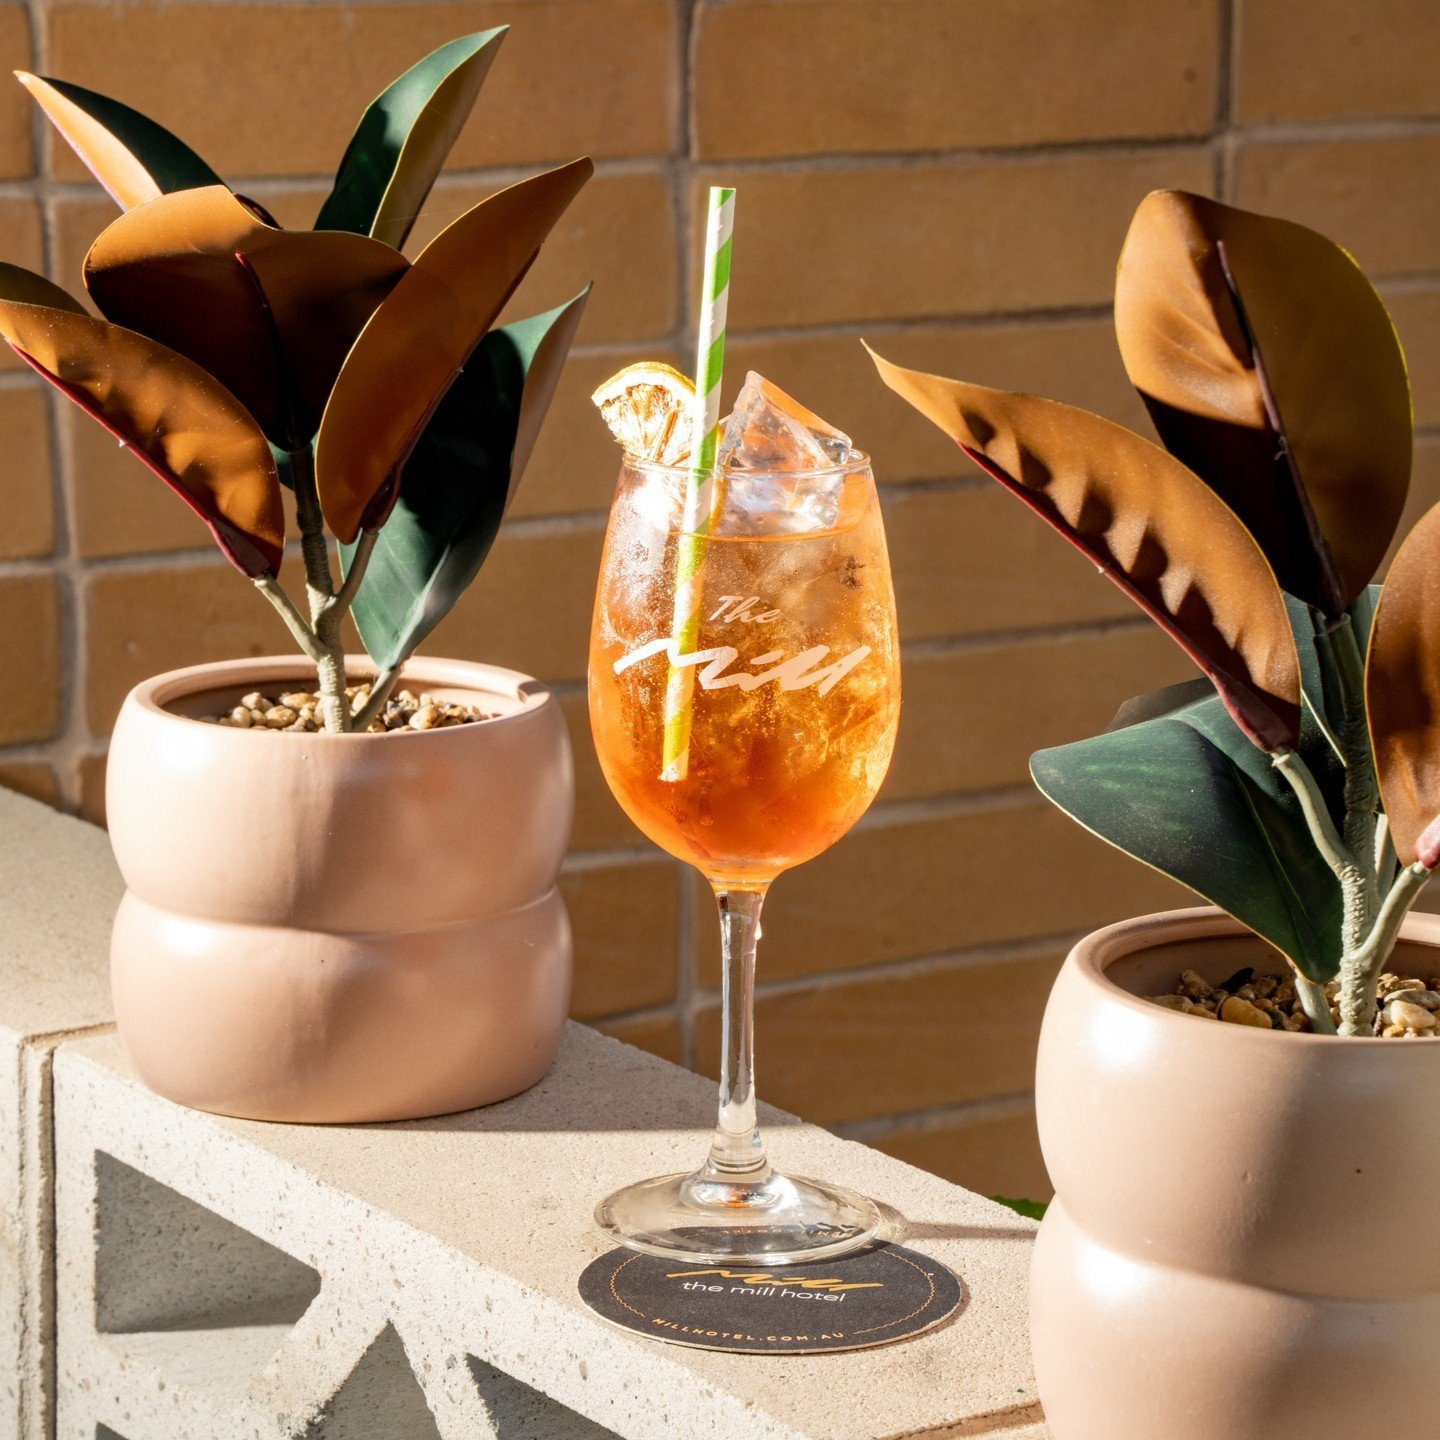 Make your Sunday a special one with our $12 Aperol Spritz available all day Sunday 🍹🍹

Let's have a warm Sunday together! 

#millhotel #milperrafood #milperradrinks #milperradining #millhotel #sundayspecial